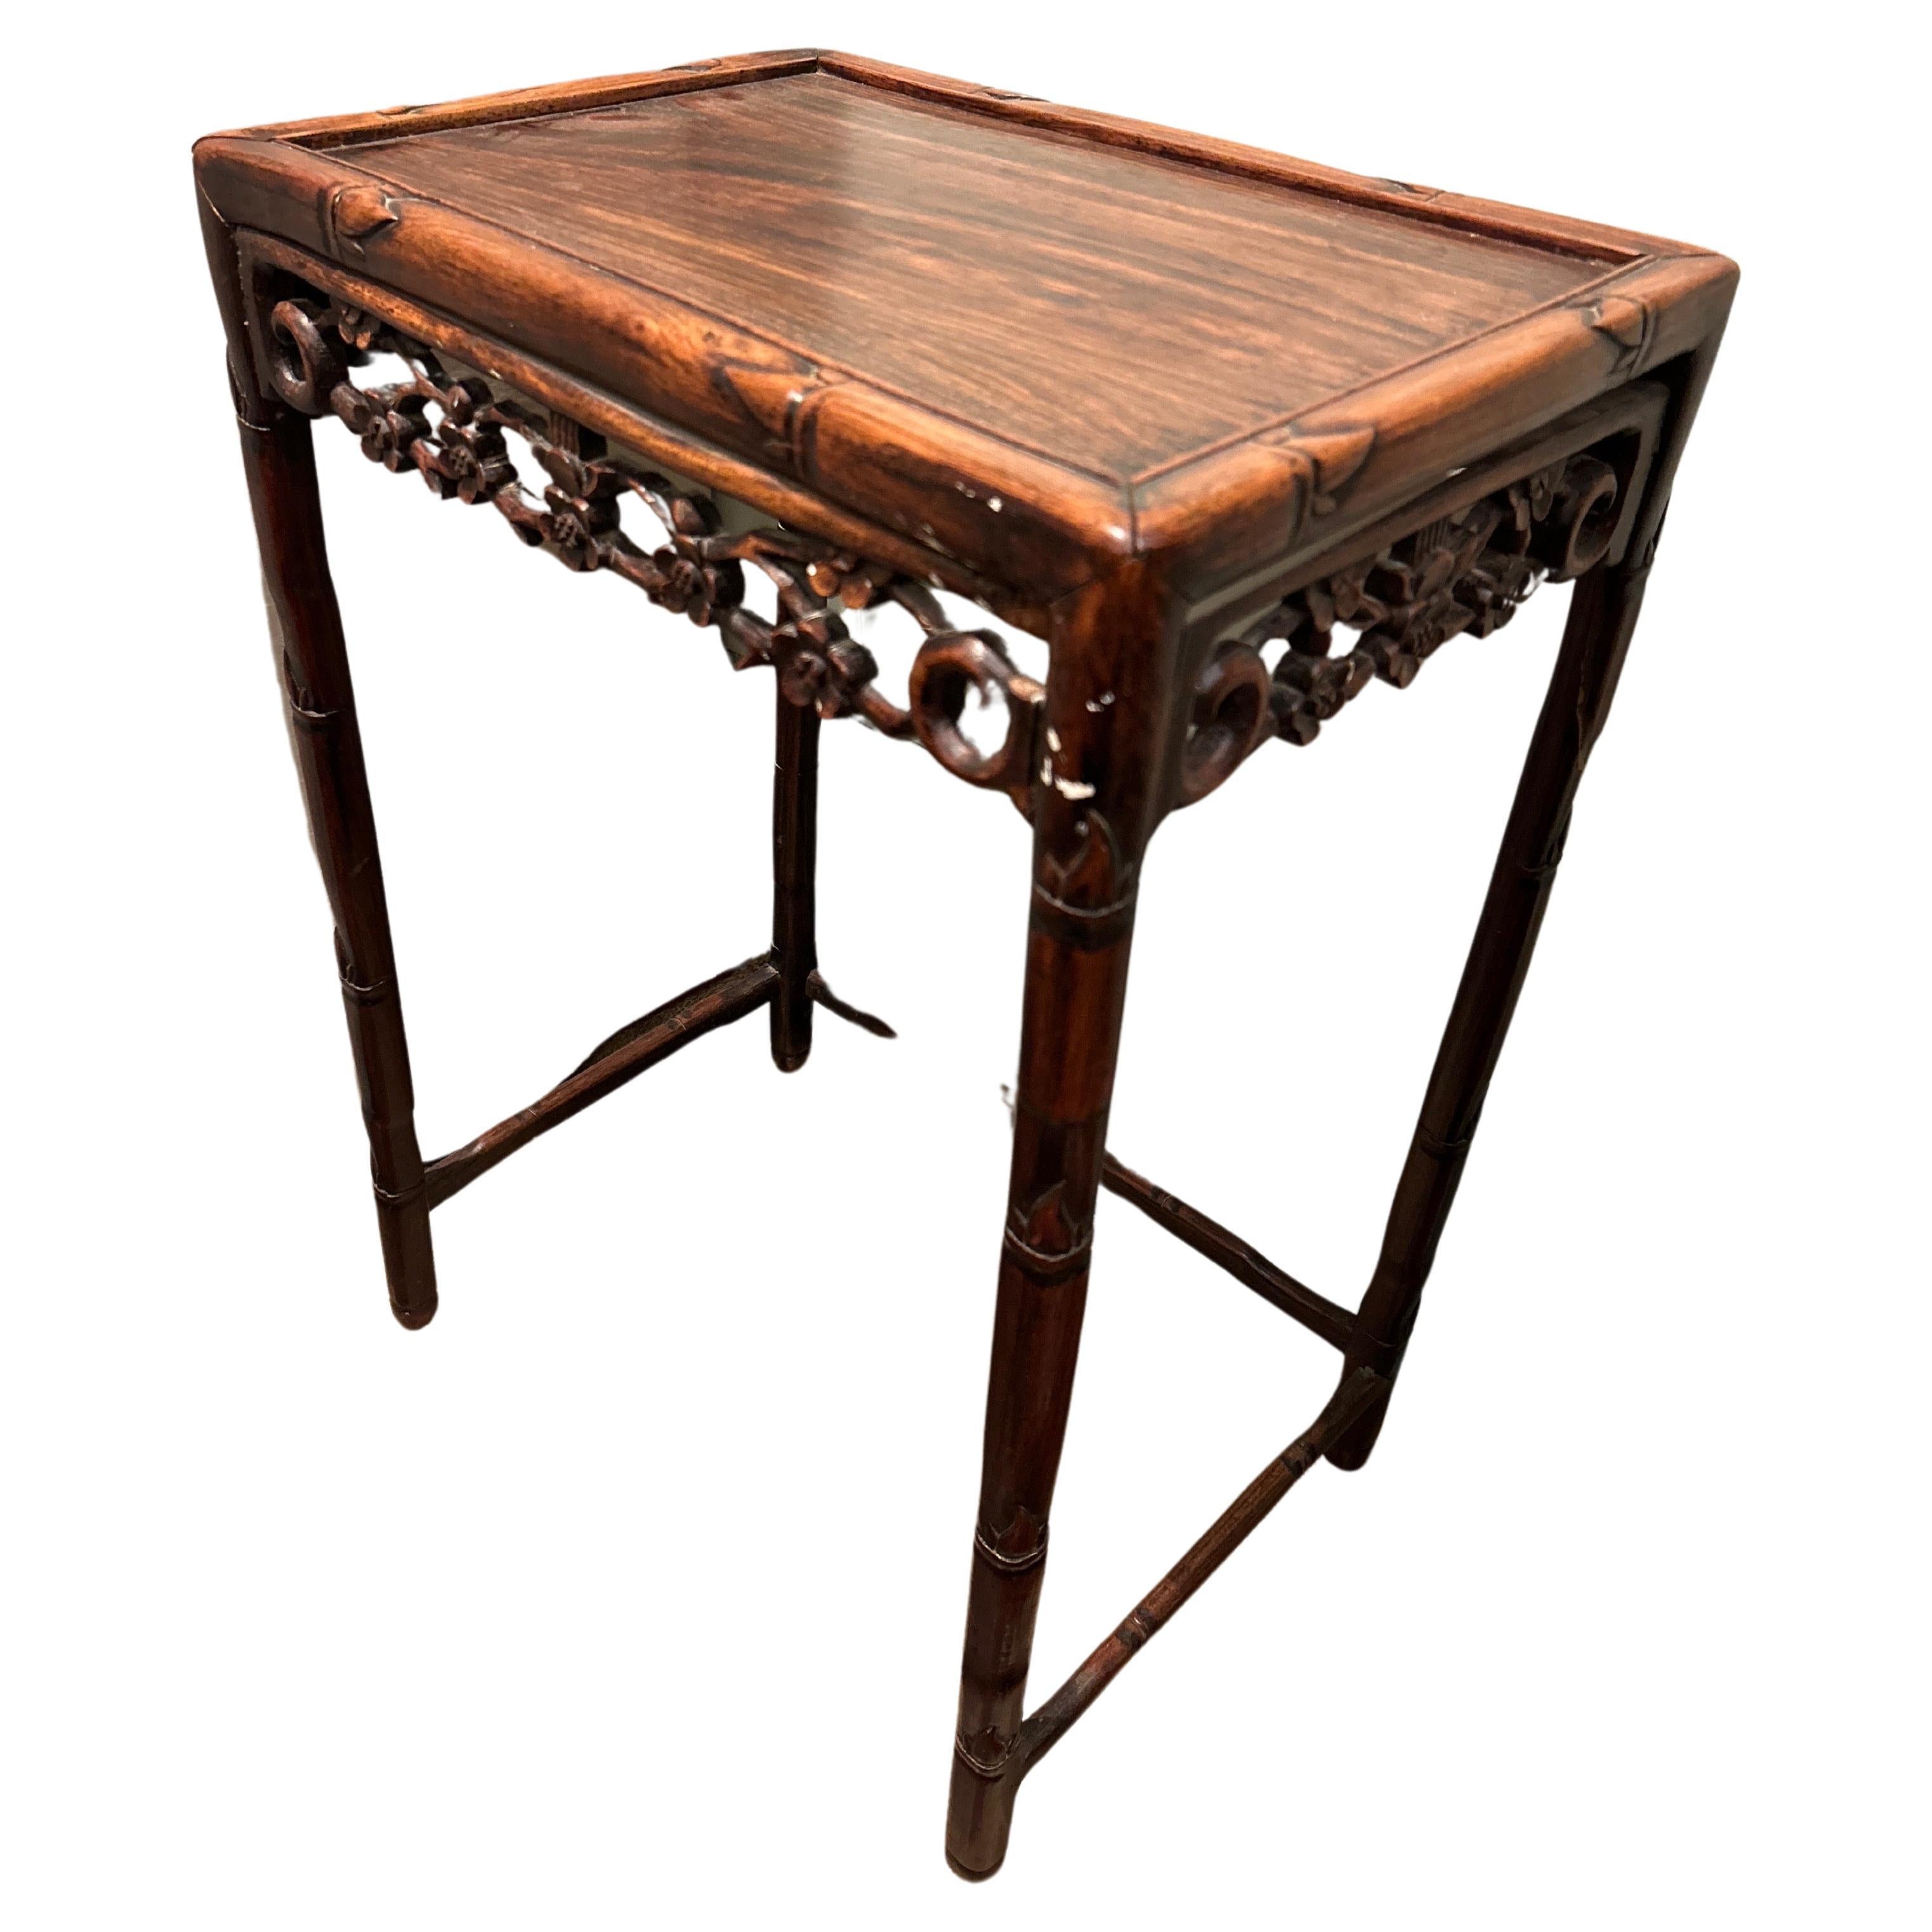 Late Qing Dynasty Rosewood Export Side Table Carved With Floral Bamboo Theme For Sale 10